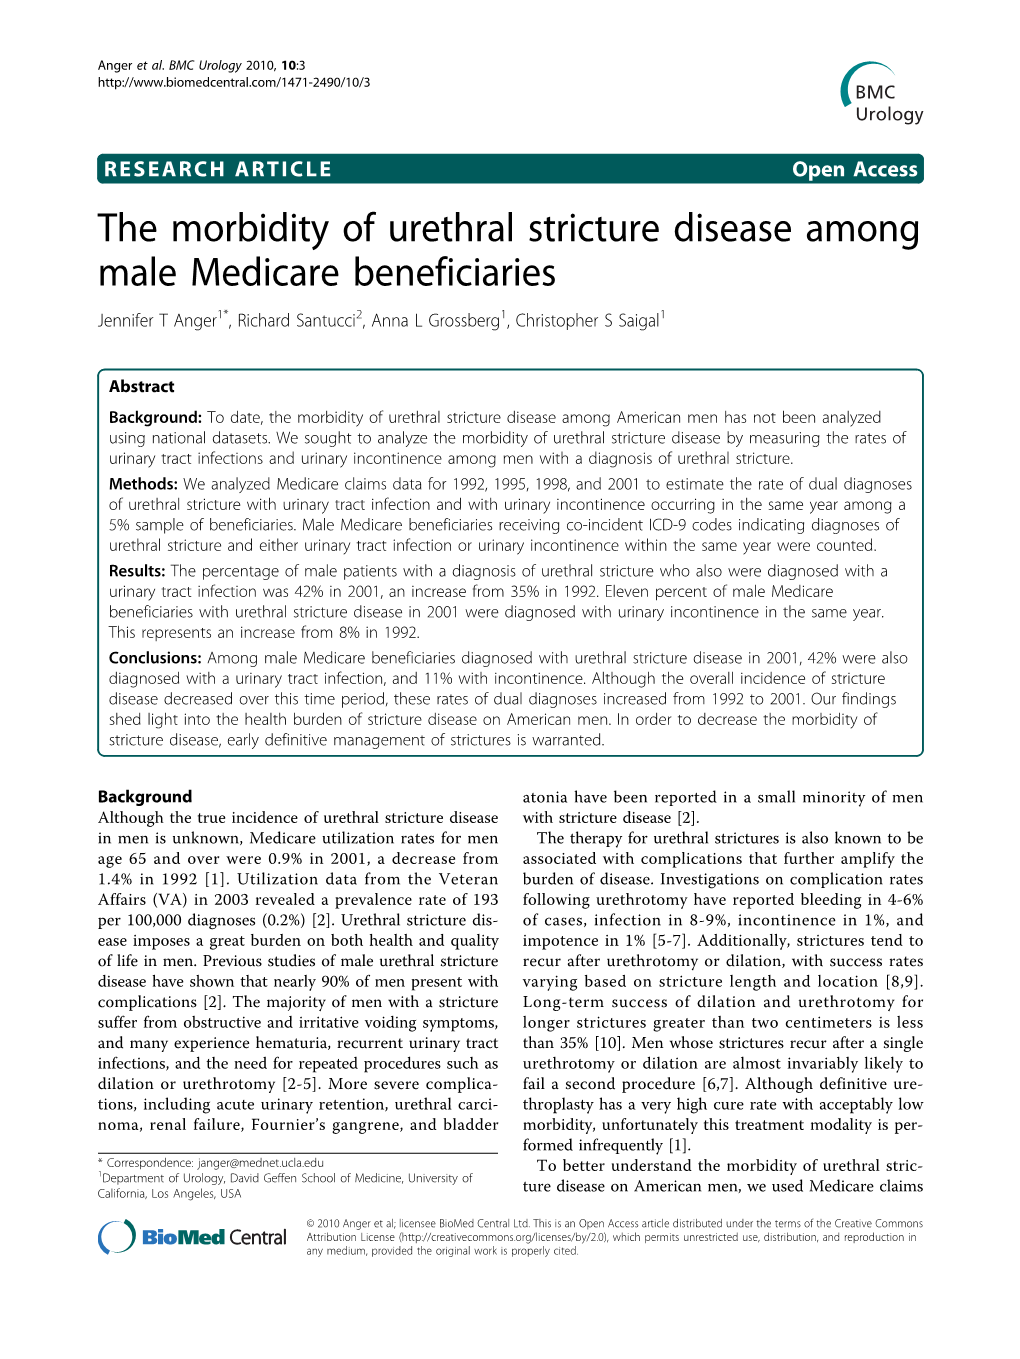 The Morbidity of Urethral Stricture Disease Among Male Medicare Beneficiaries Jennifer T Anger1*, Richard Santucci2, Anna L Grossberg1, Christopher S Saigal1